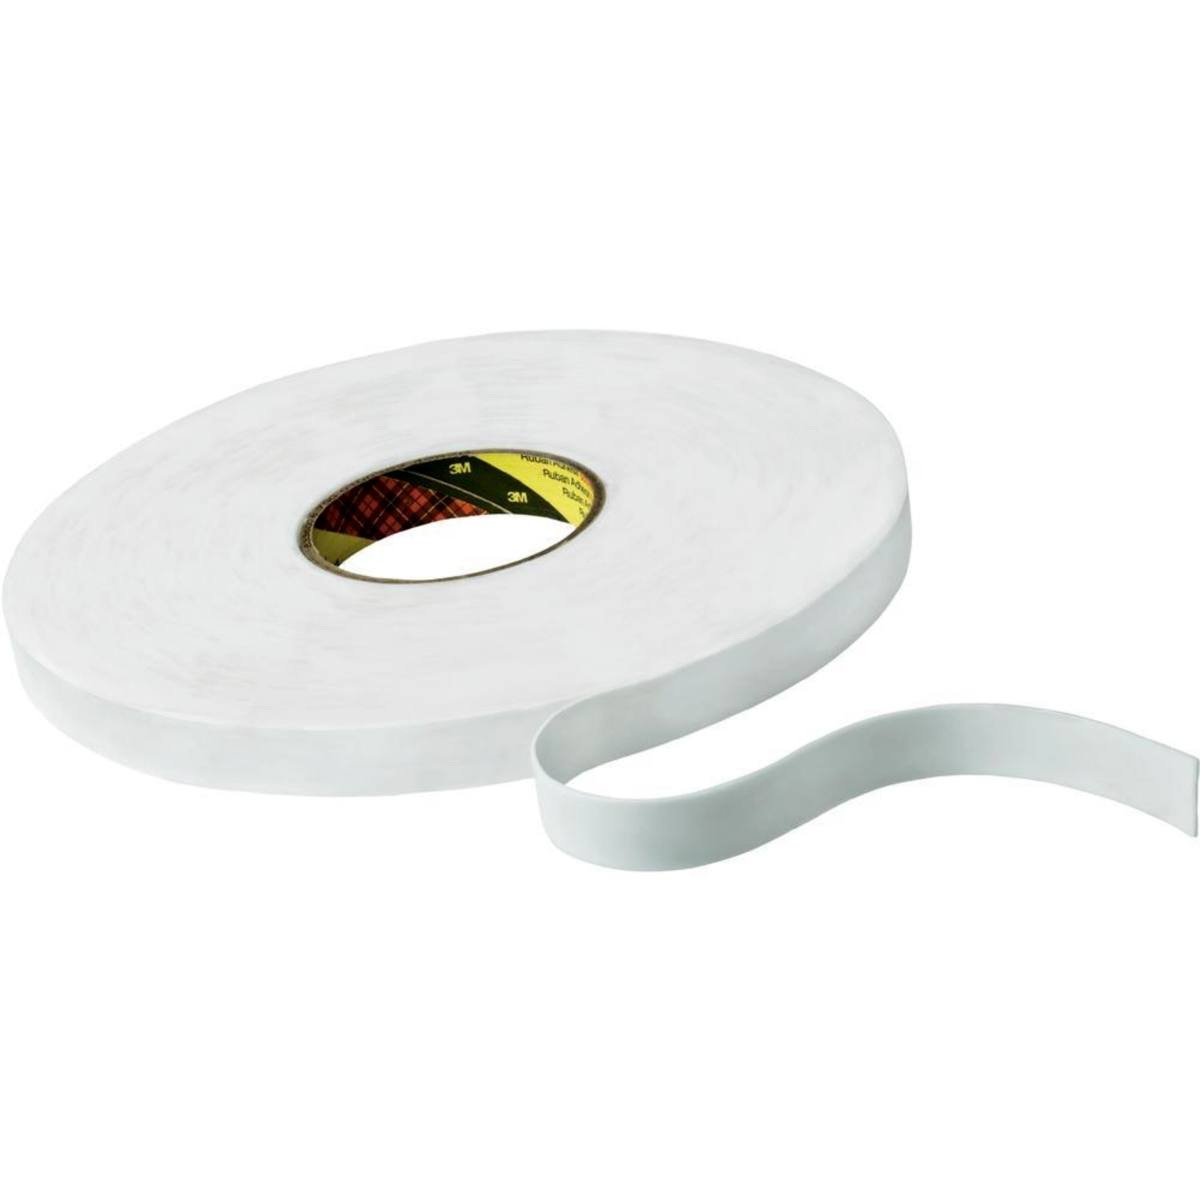 3M Double-sided PE foam tape with acrylic adhesive 9508W, white, 19 mm x 66 m, 0.8 mm